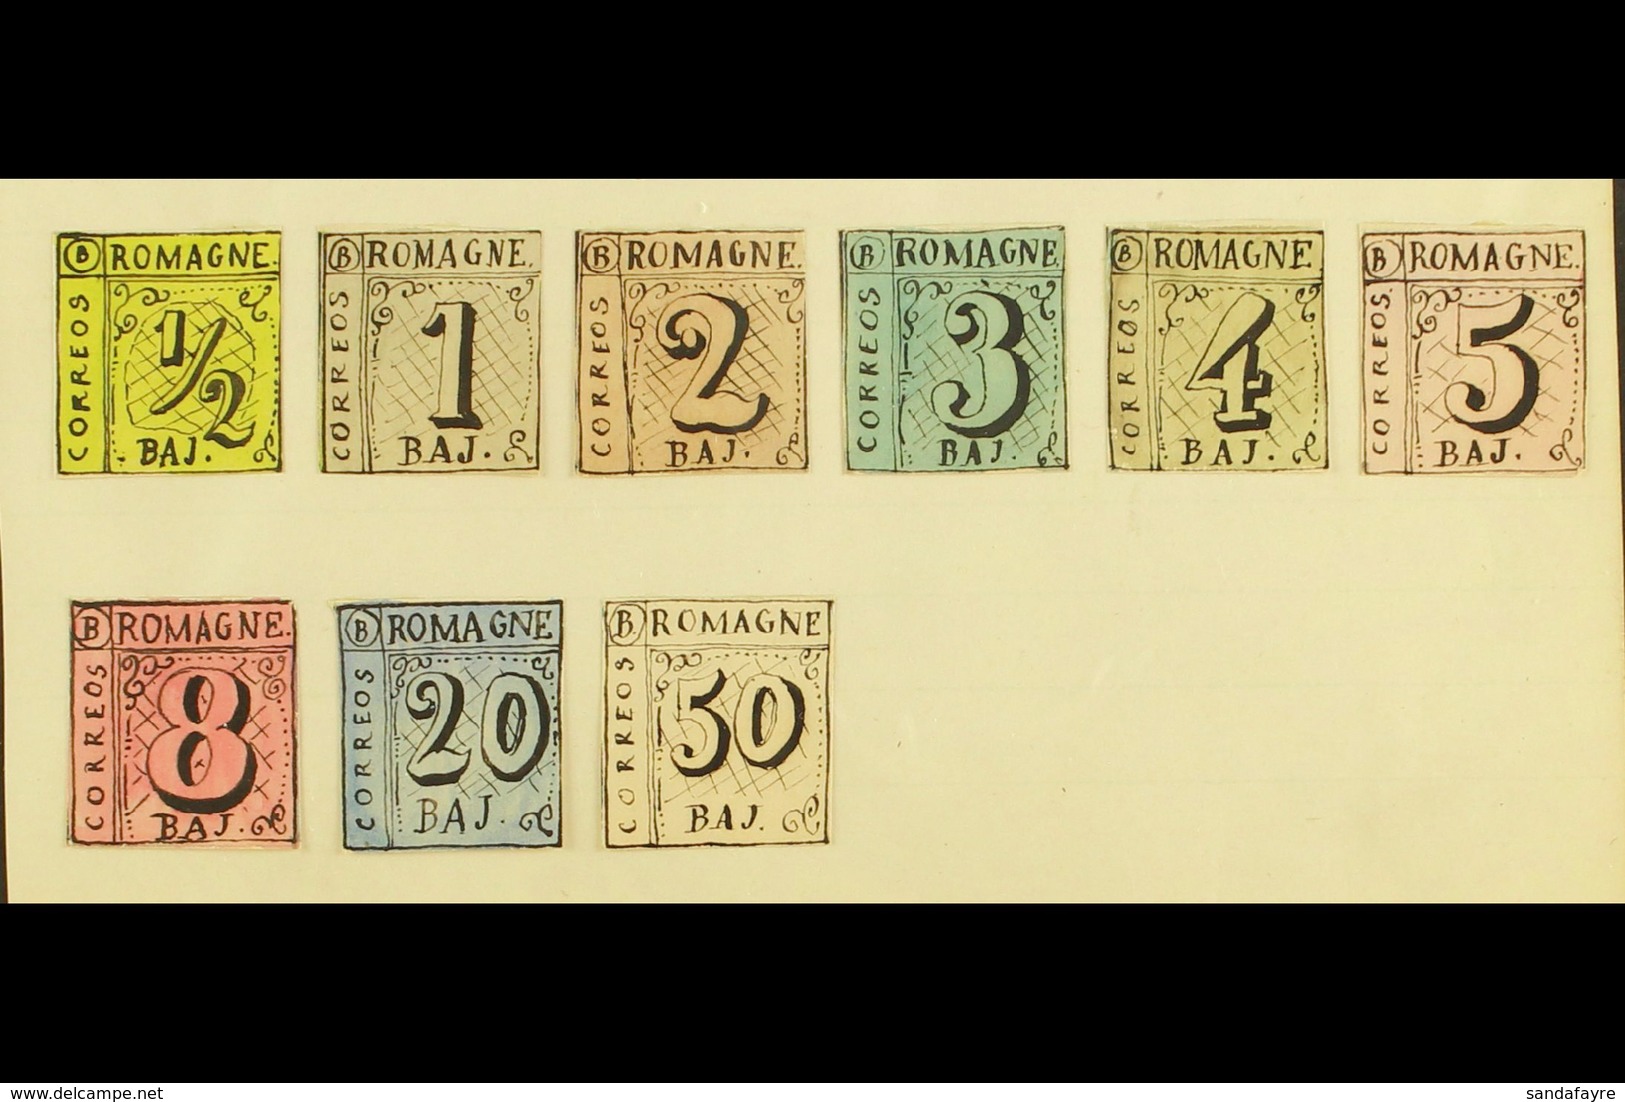 1861 HAND PAINTED STAMPS Unique Miniature Artworks Created By A French "Timbrophile" In 1861. ROMAGNA Nine Different Val - Unclassified